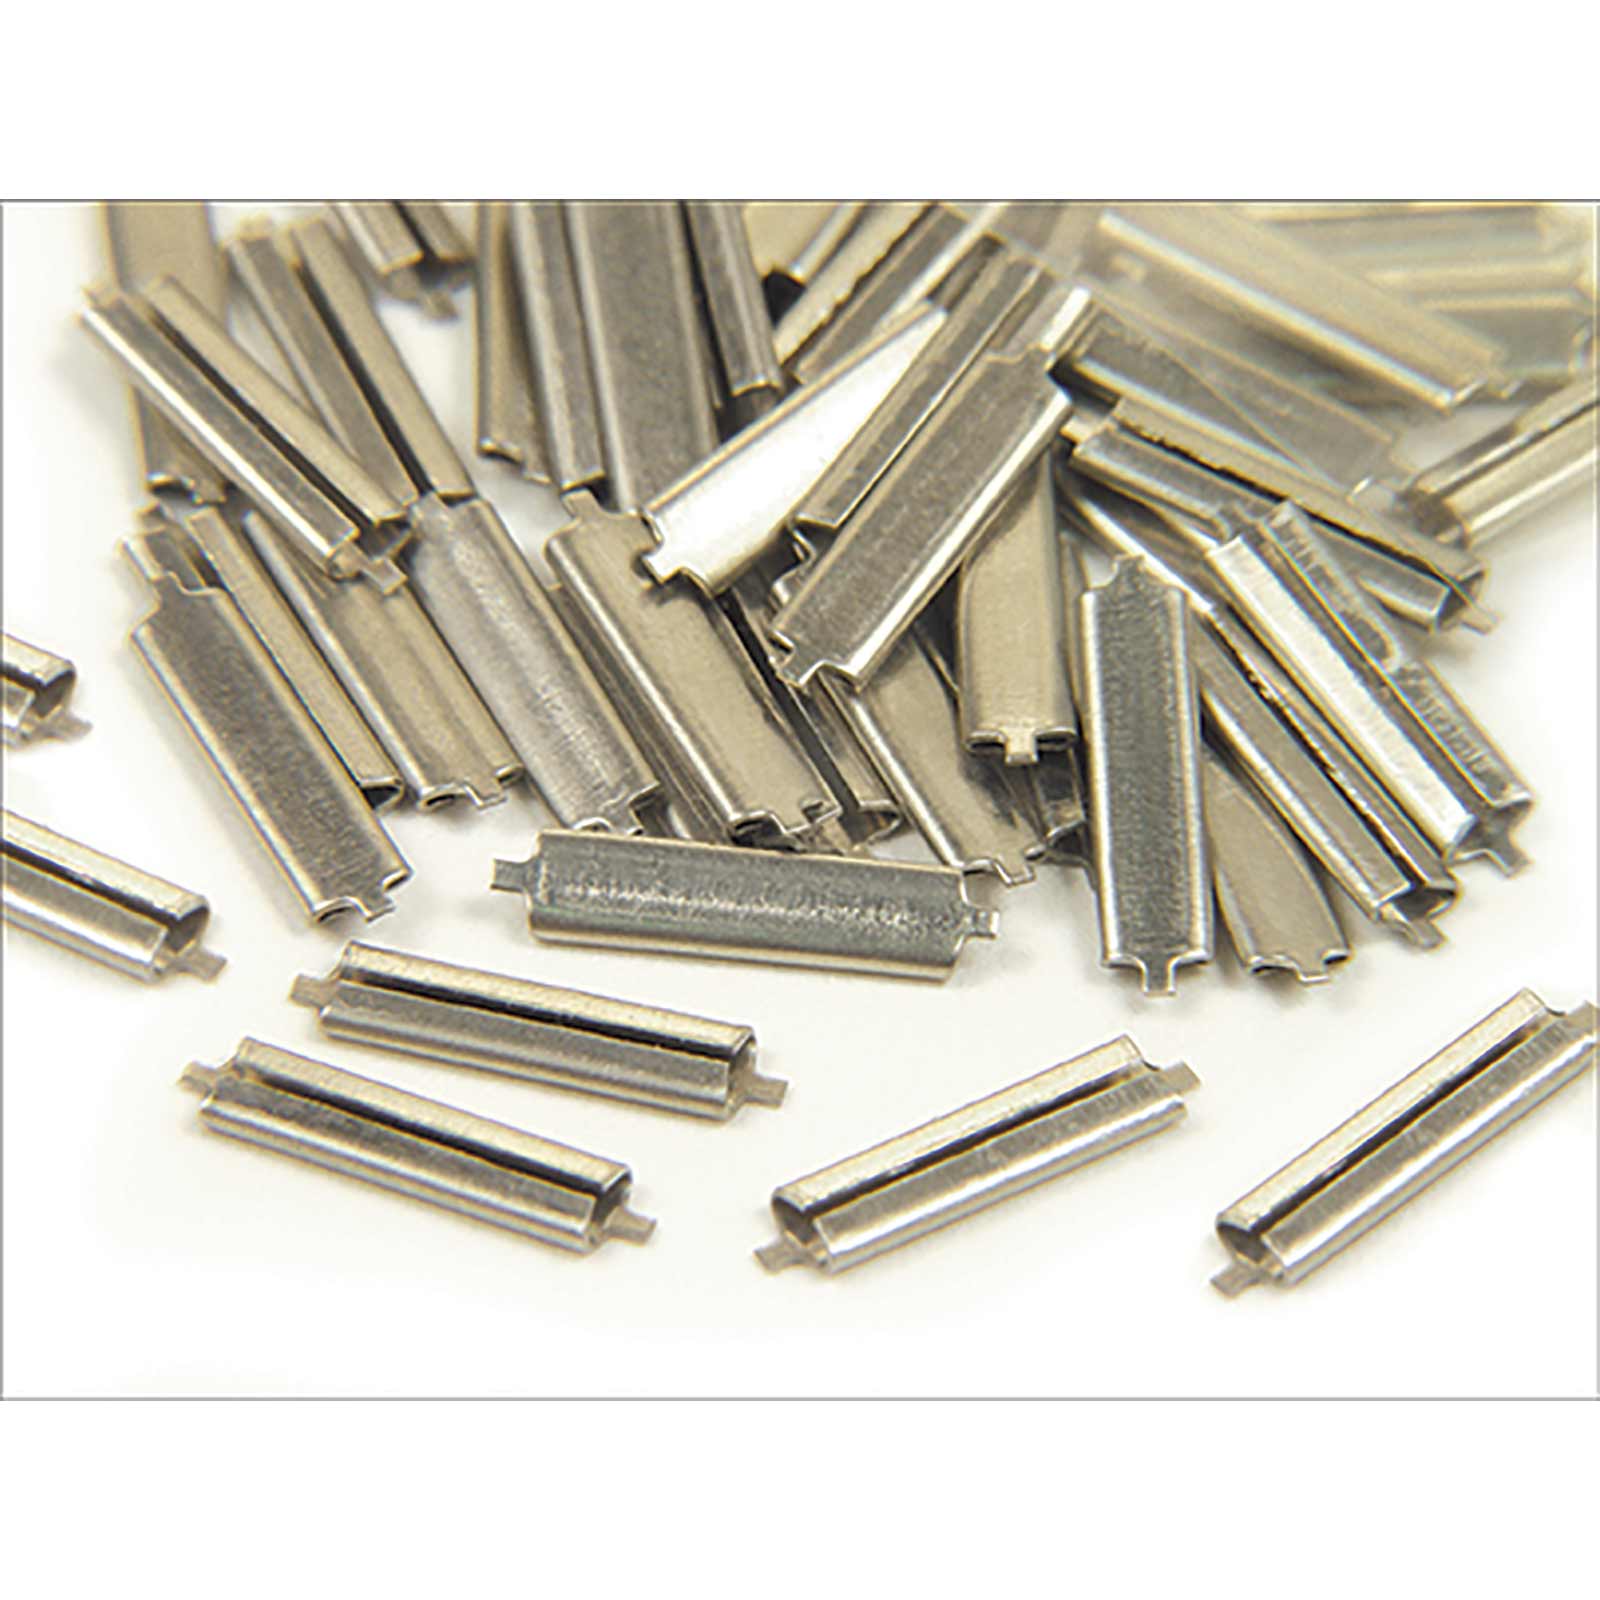 Micro Engineering Slide - On Code 70 Rail Joiners 50 Pieces